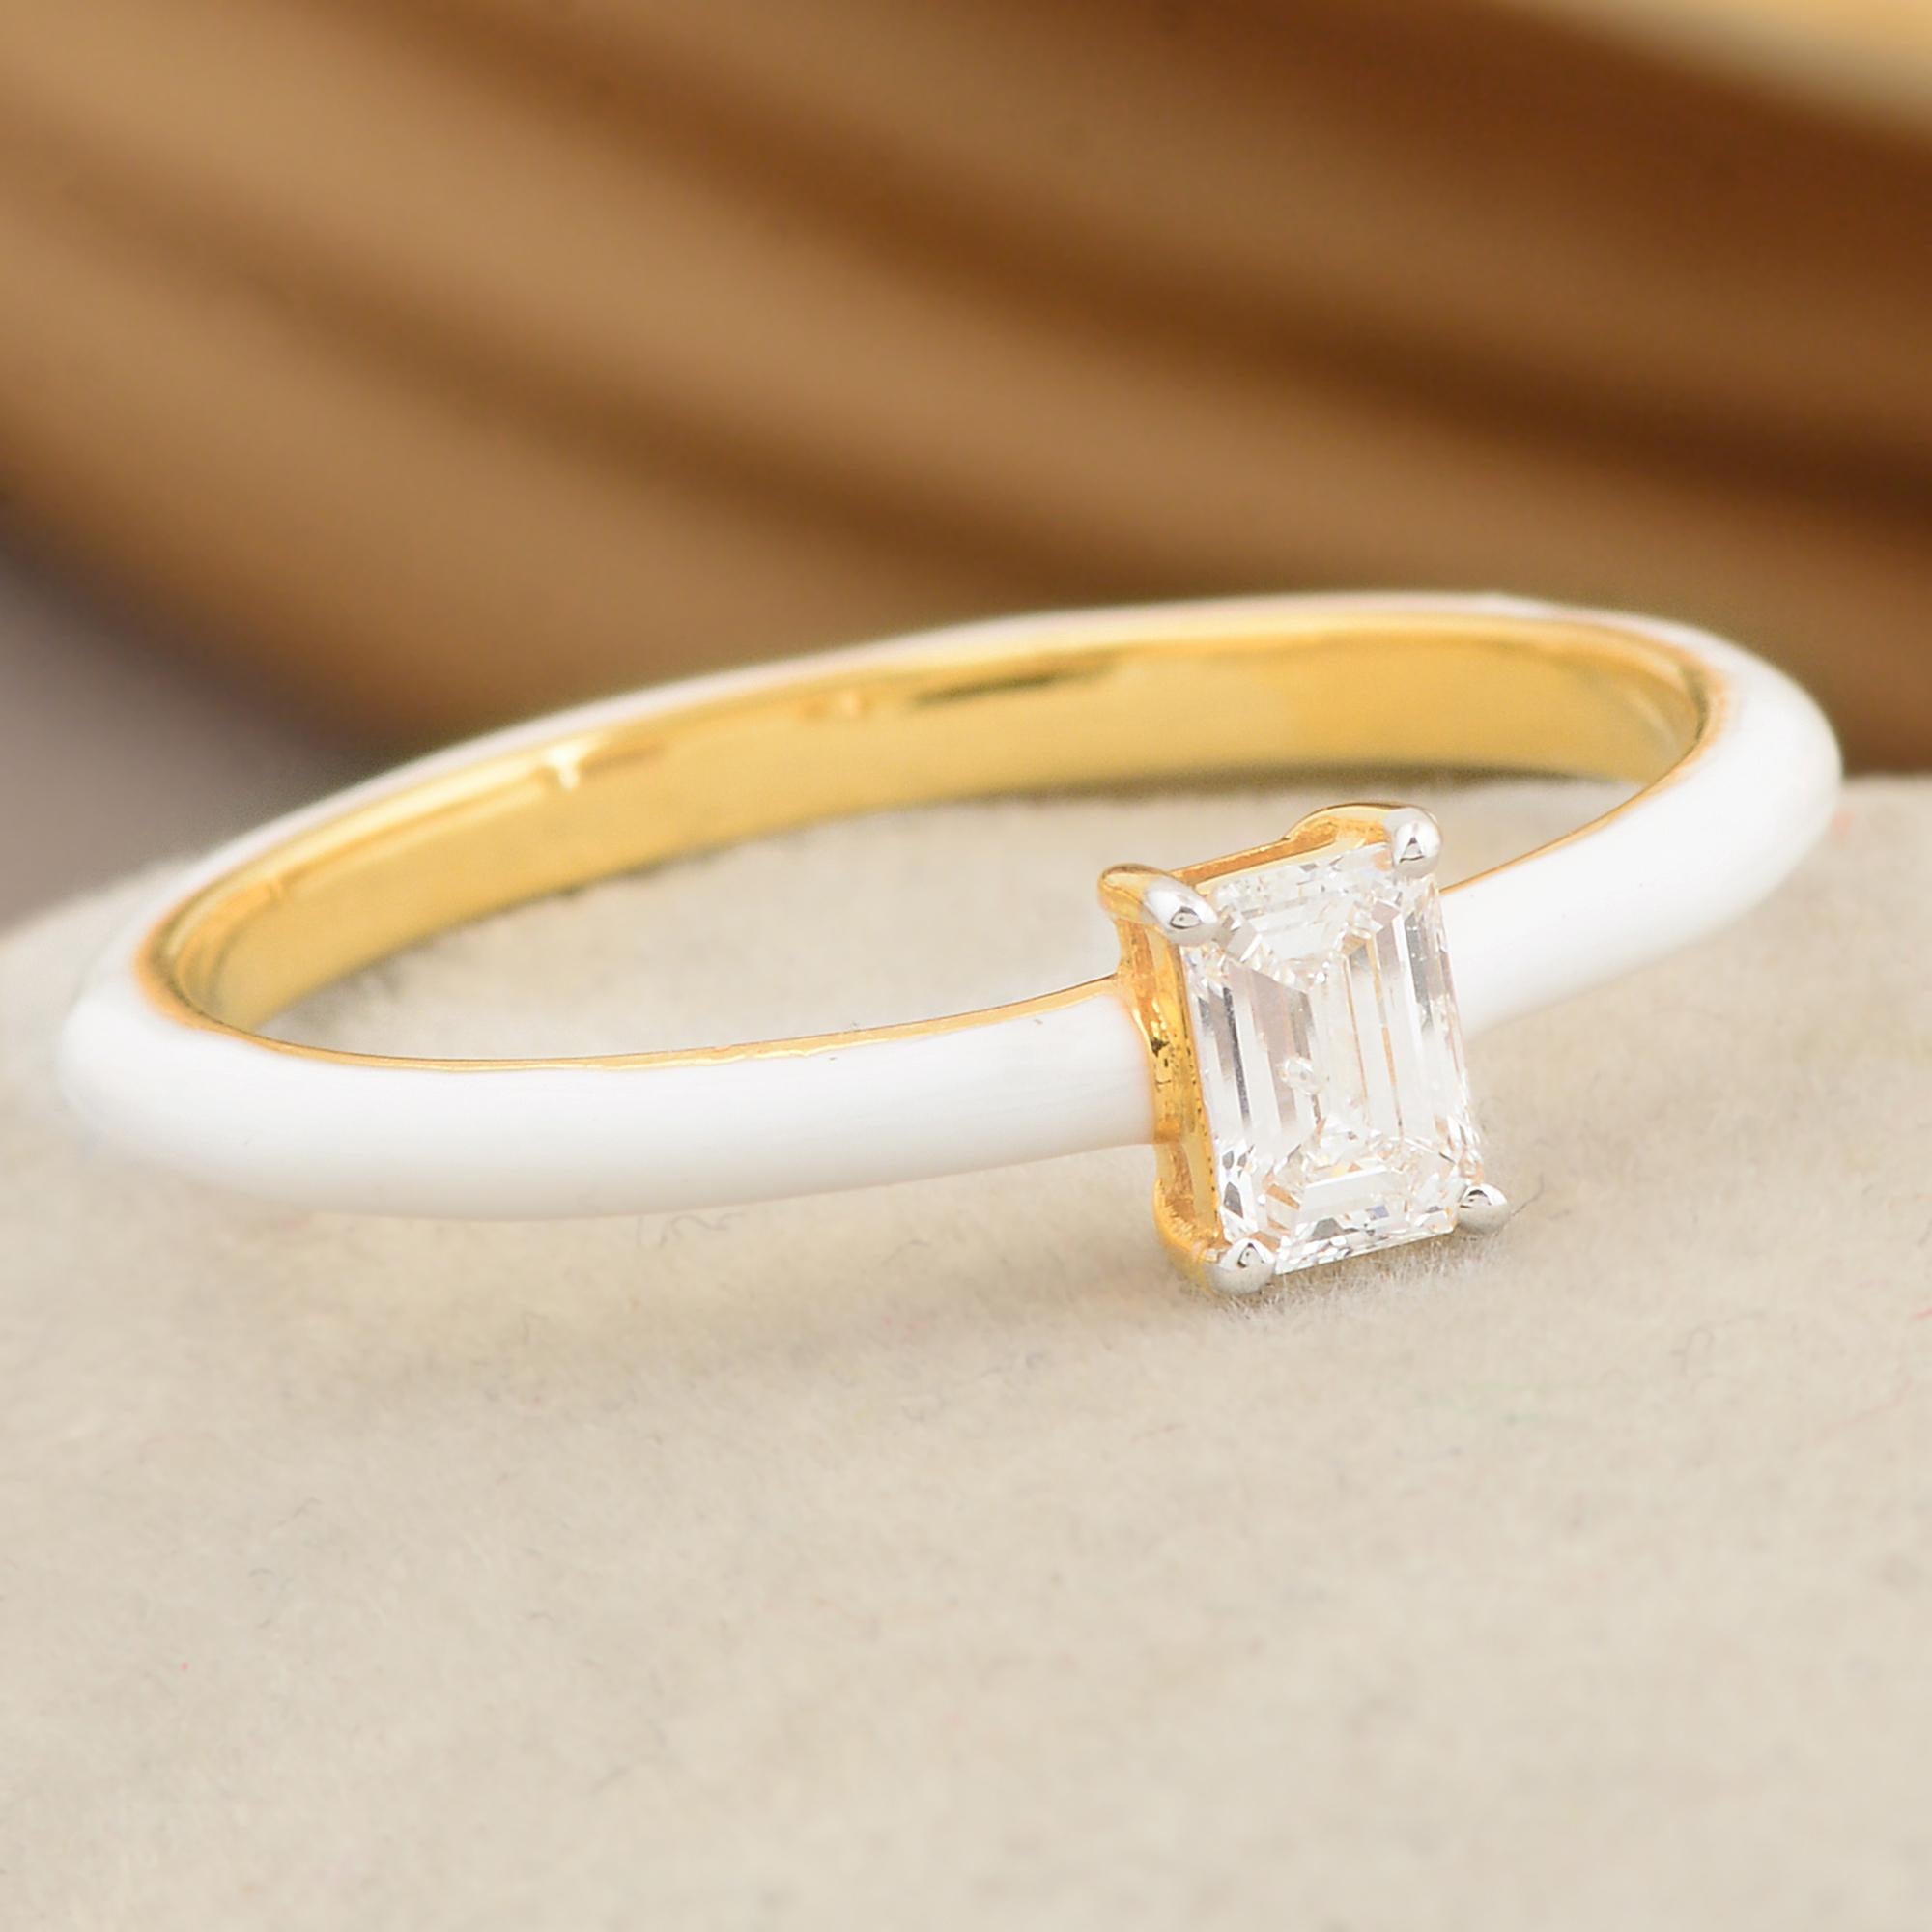 For Sale:  0.26 Carat Solitaire Emerald Cut Diamond Band Ring White Enamel 18k Yellow Gold 4